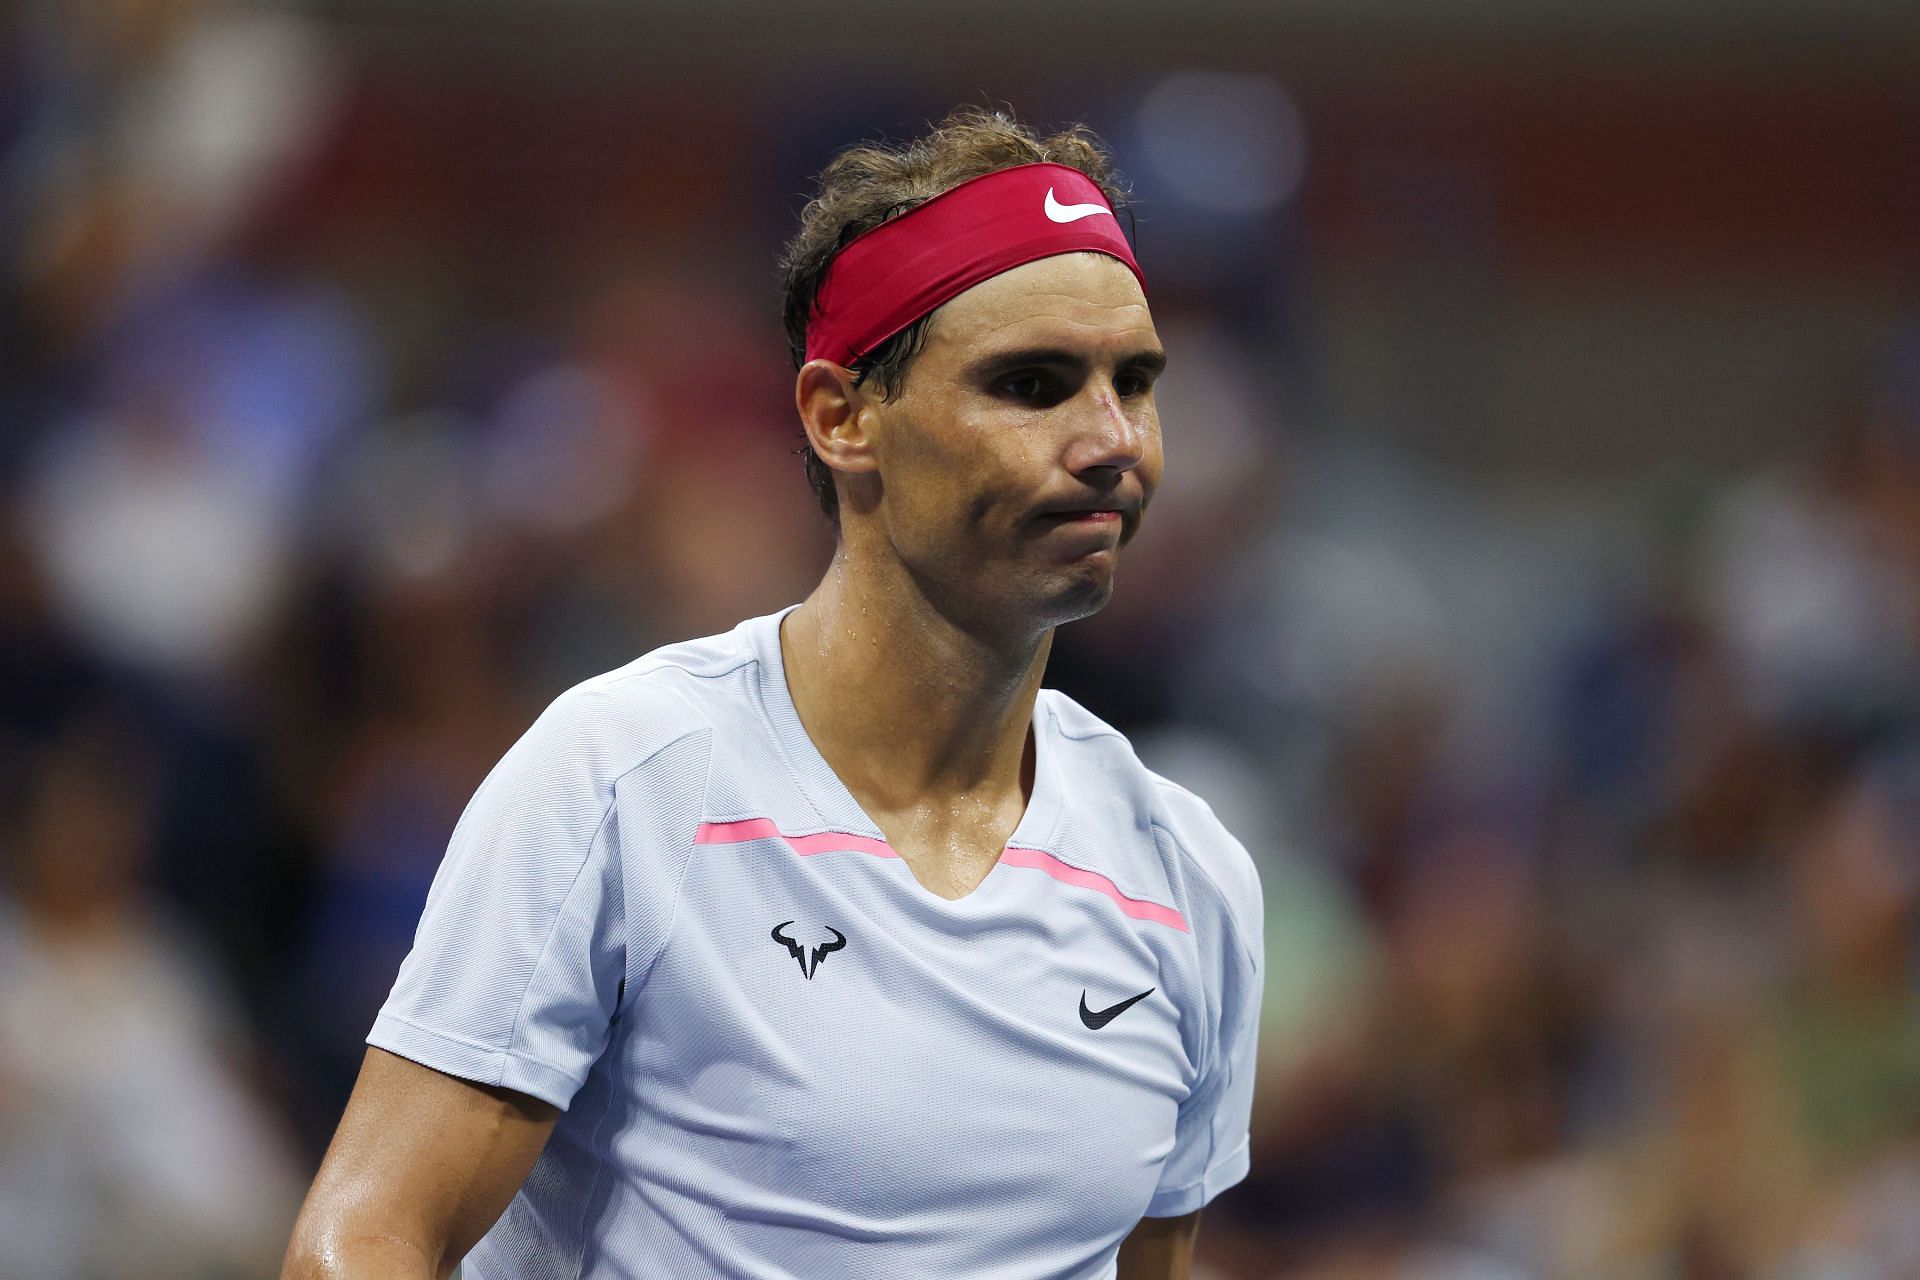 Rafael Nadal made a fourth-round exit at the 2022 US Open.